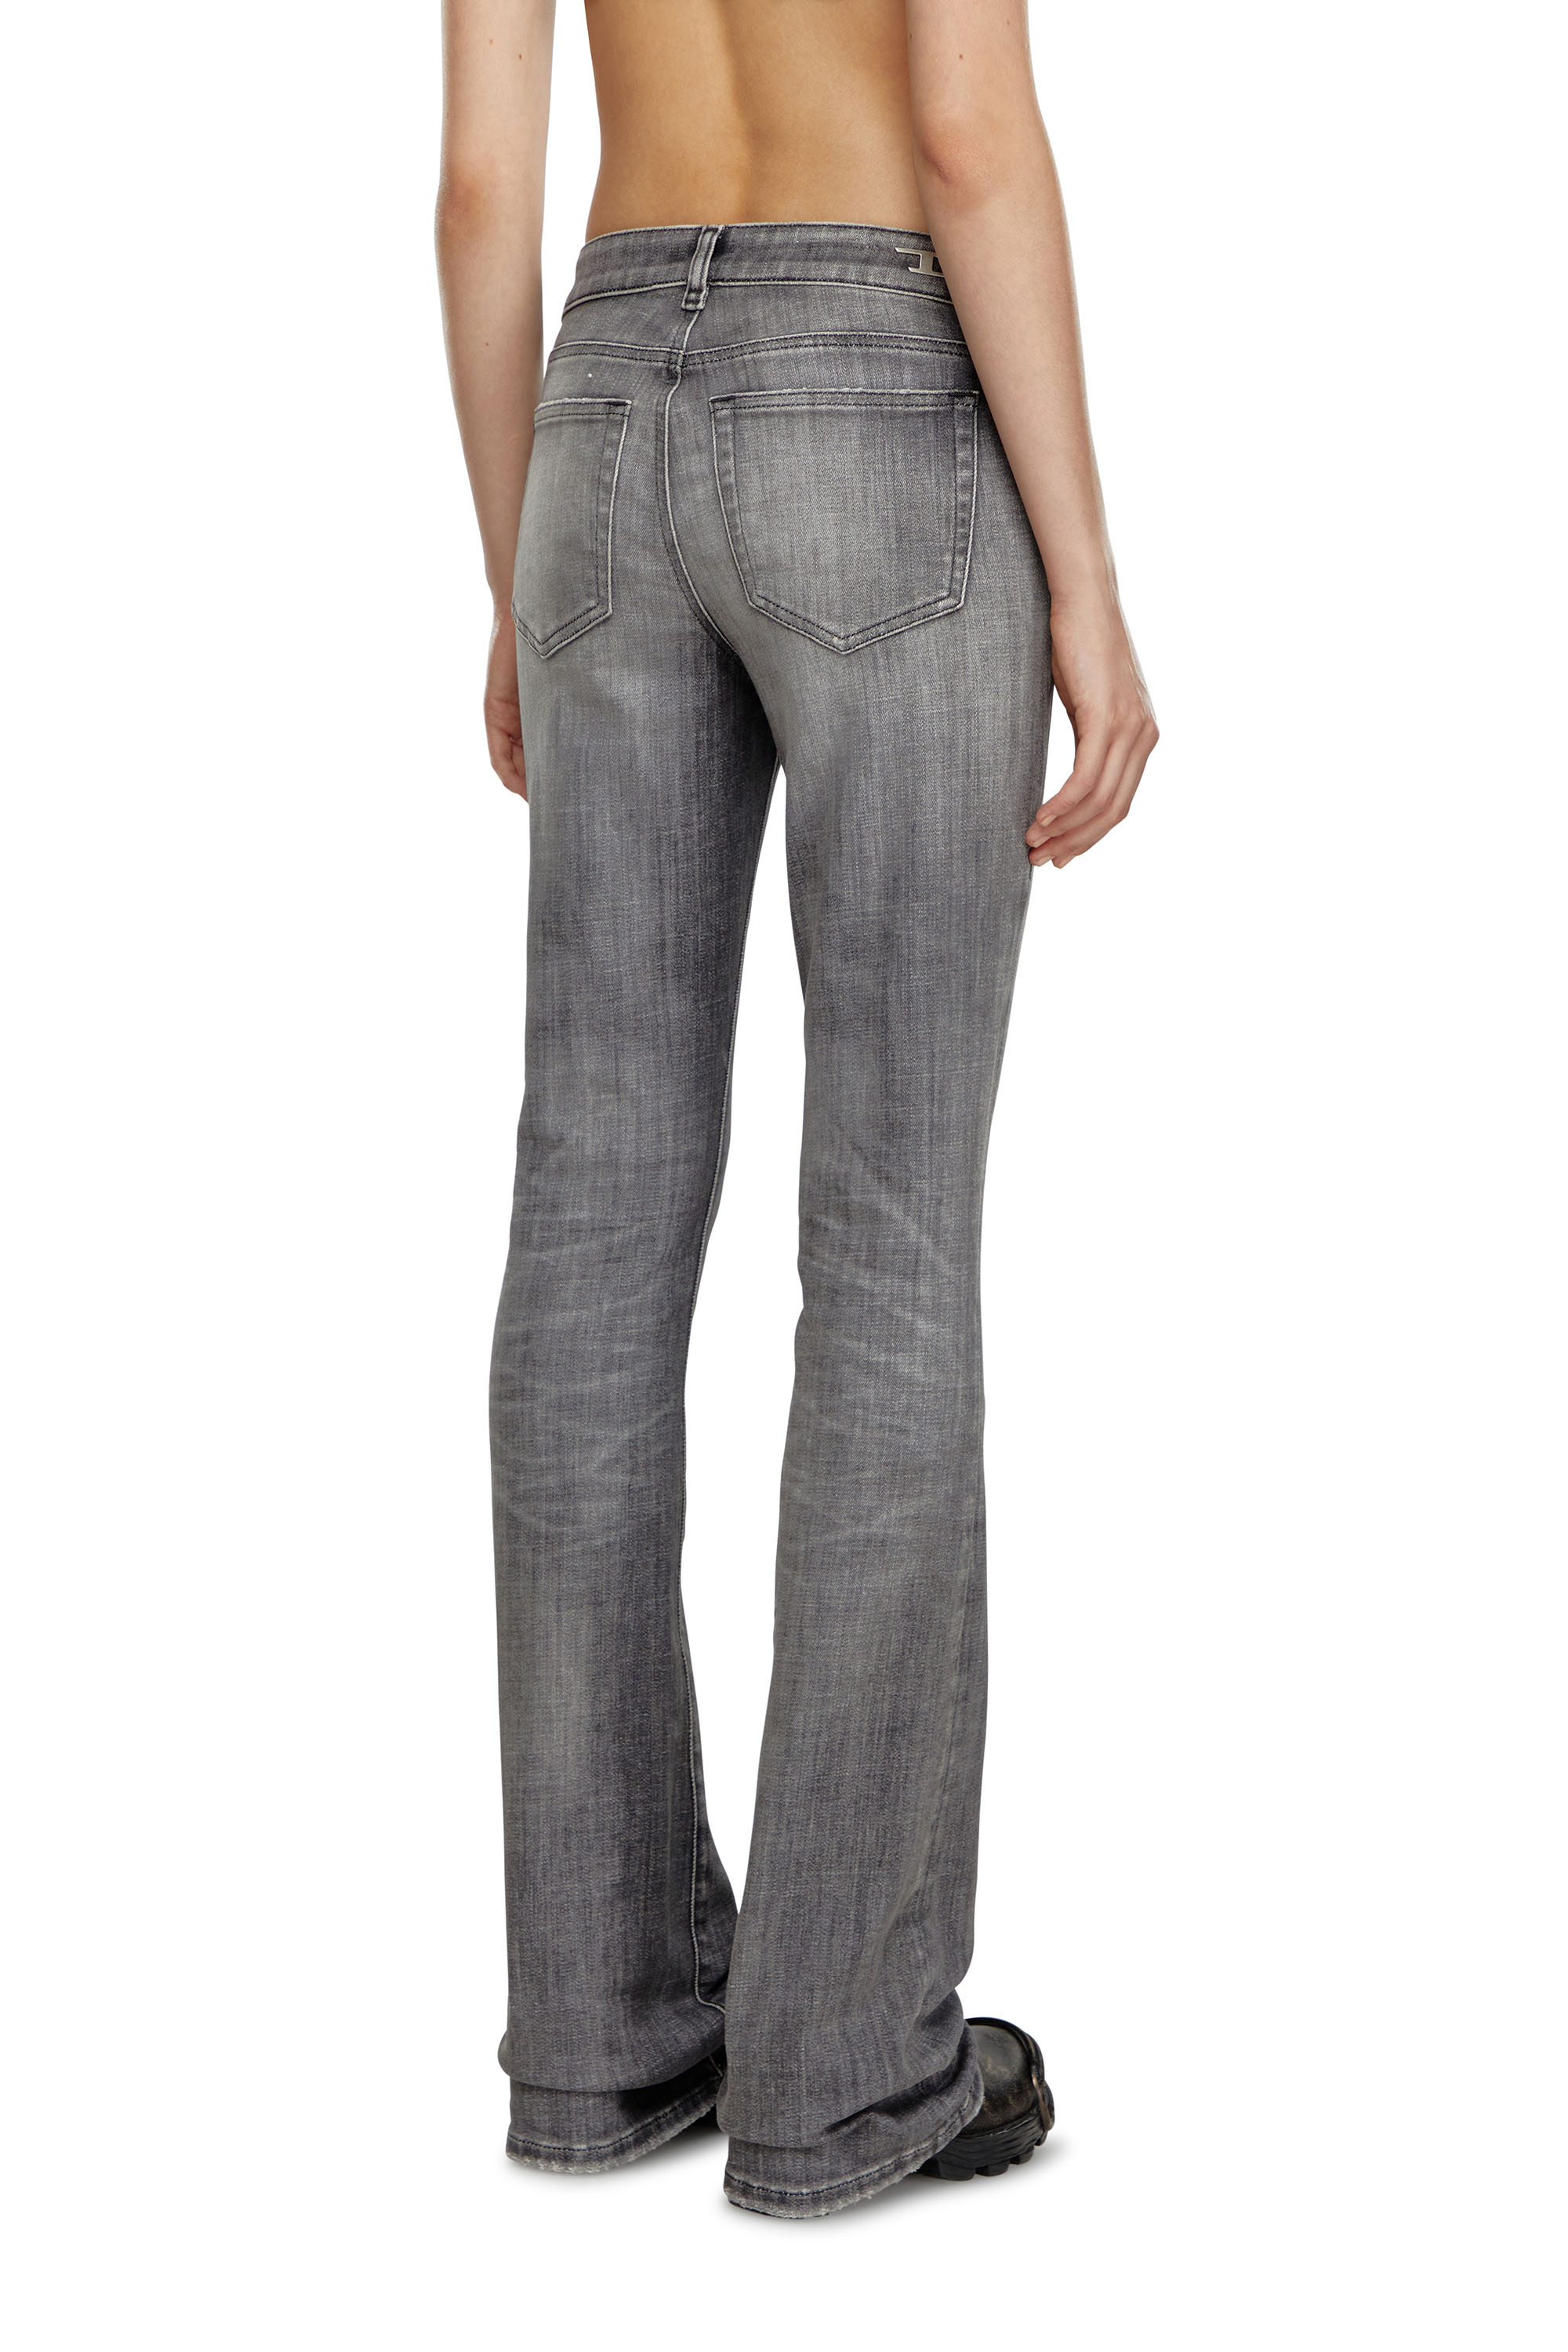 Diesel - Bootcut and Flare Jeans 1969 D-Ebbey 09J29, Mujer Bootcut y Flare Jeans - 1969 D-Ebbey in Gris - Image 3